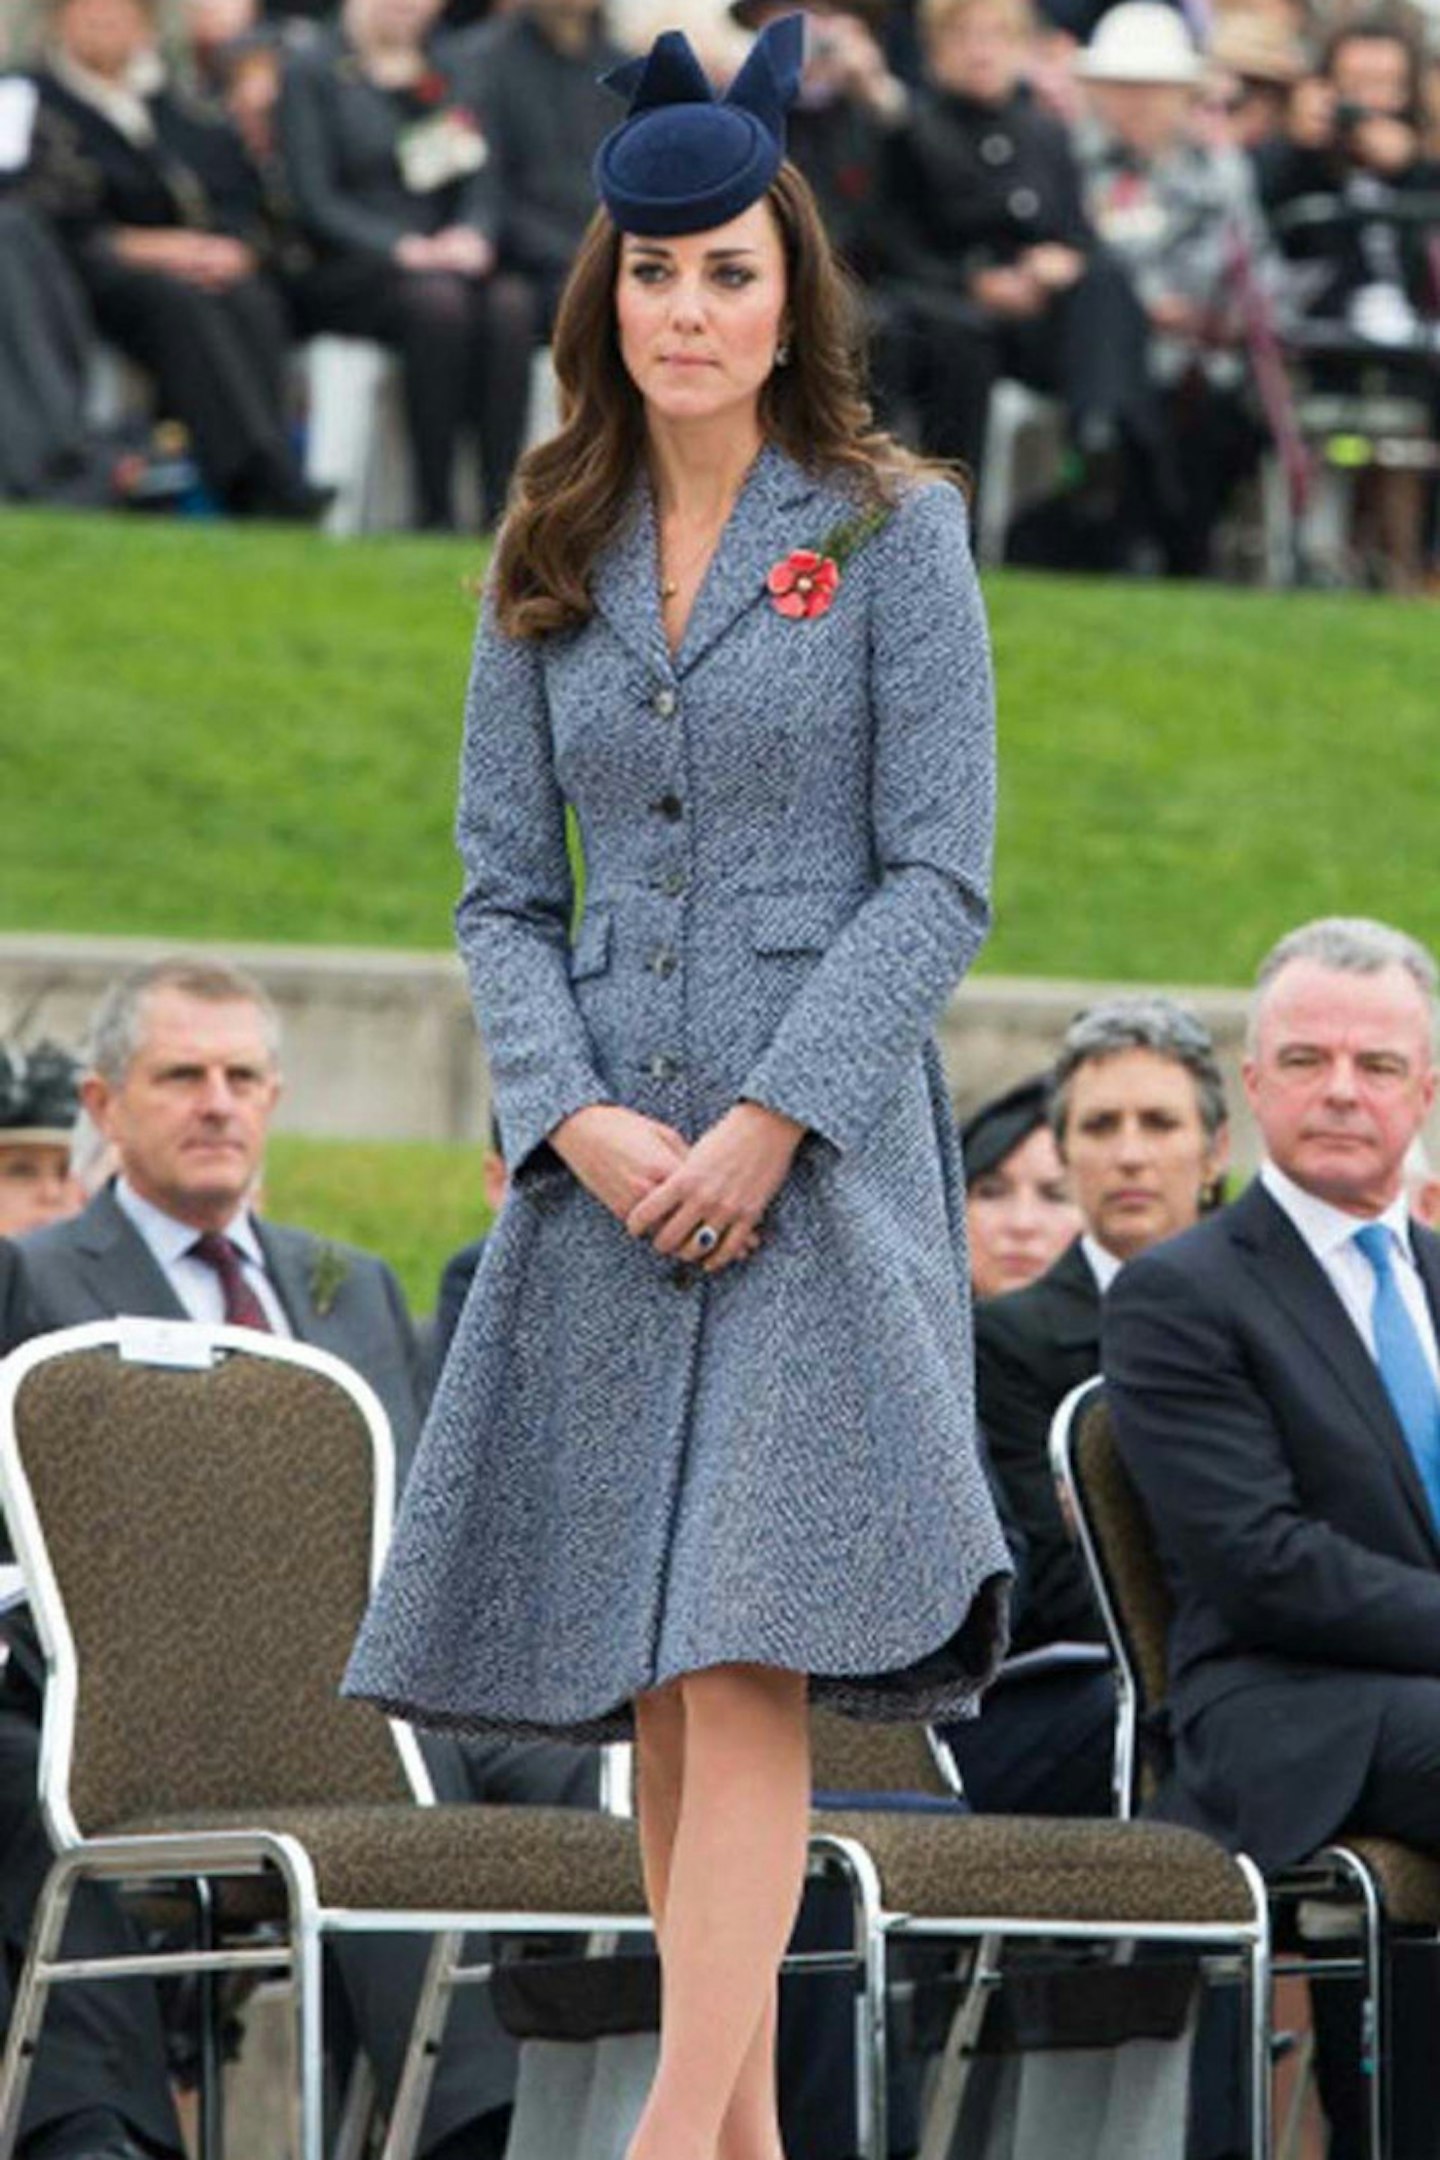 Kate Middleton wears Emilia Wickstead coat at the ANZAC Day commemorative service, 25 April 2014